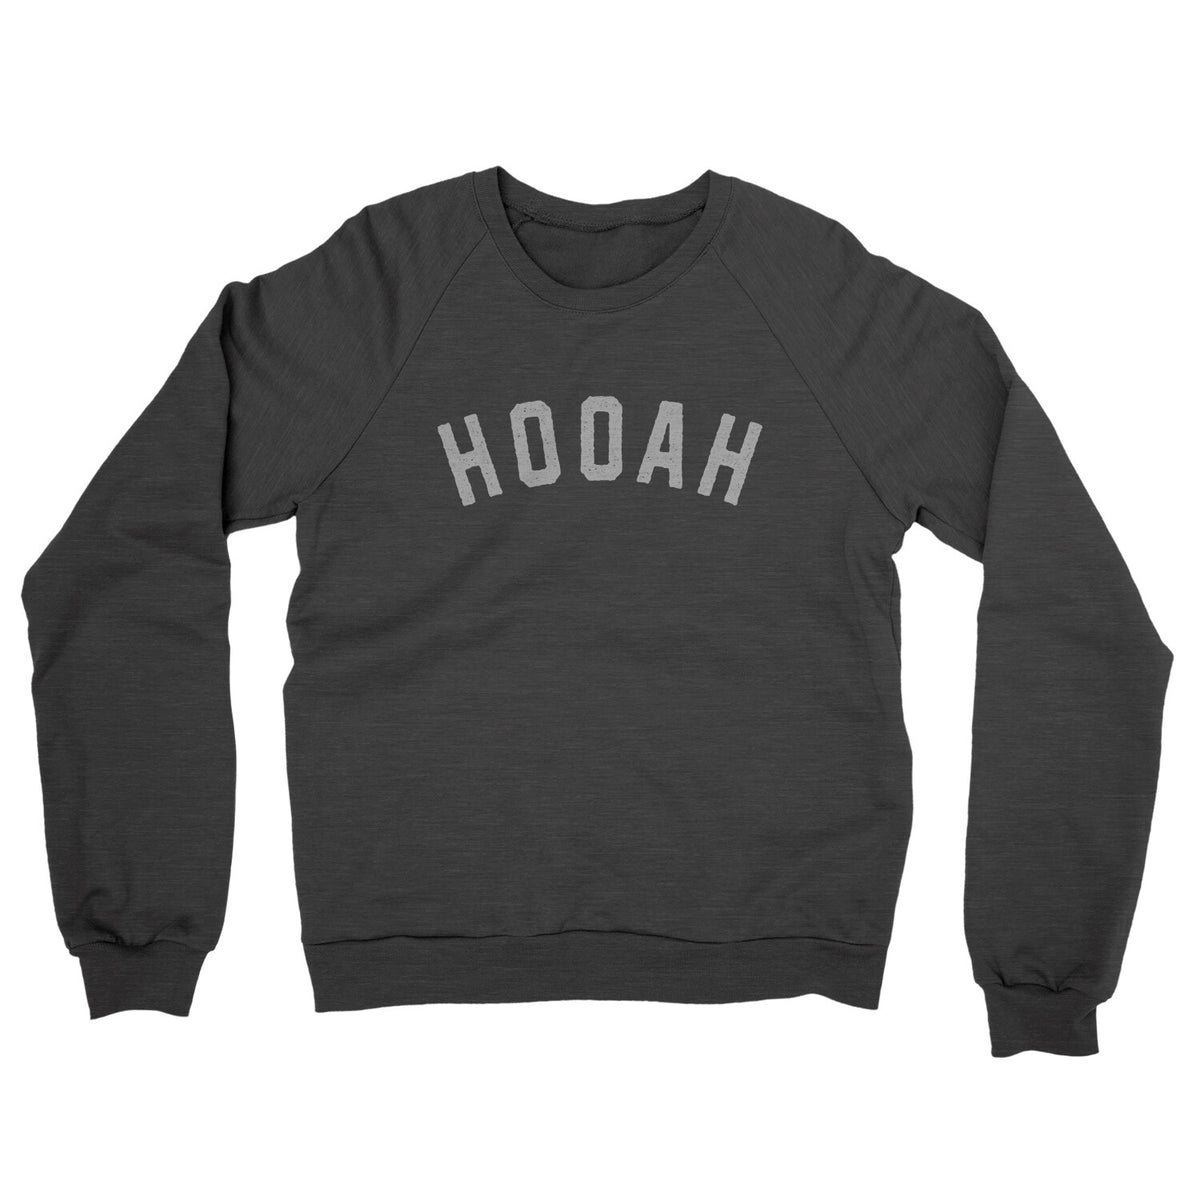 Hooah in Charcoal Heather Color